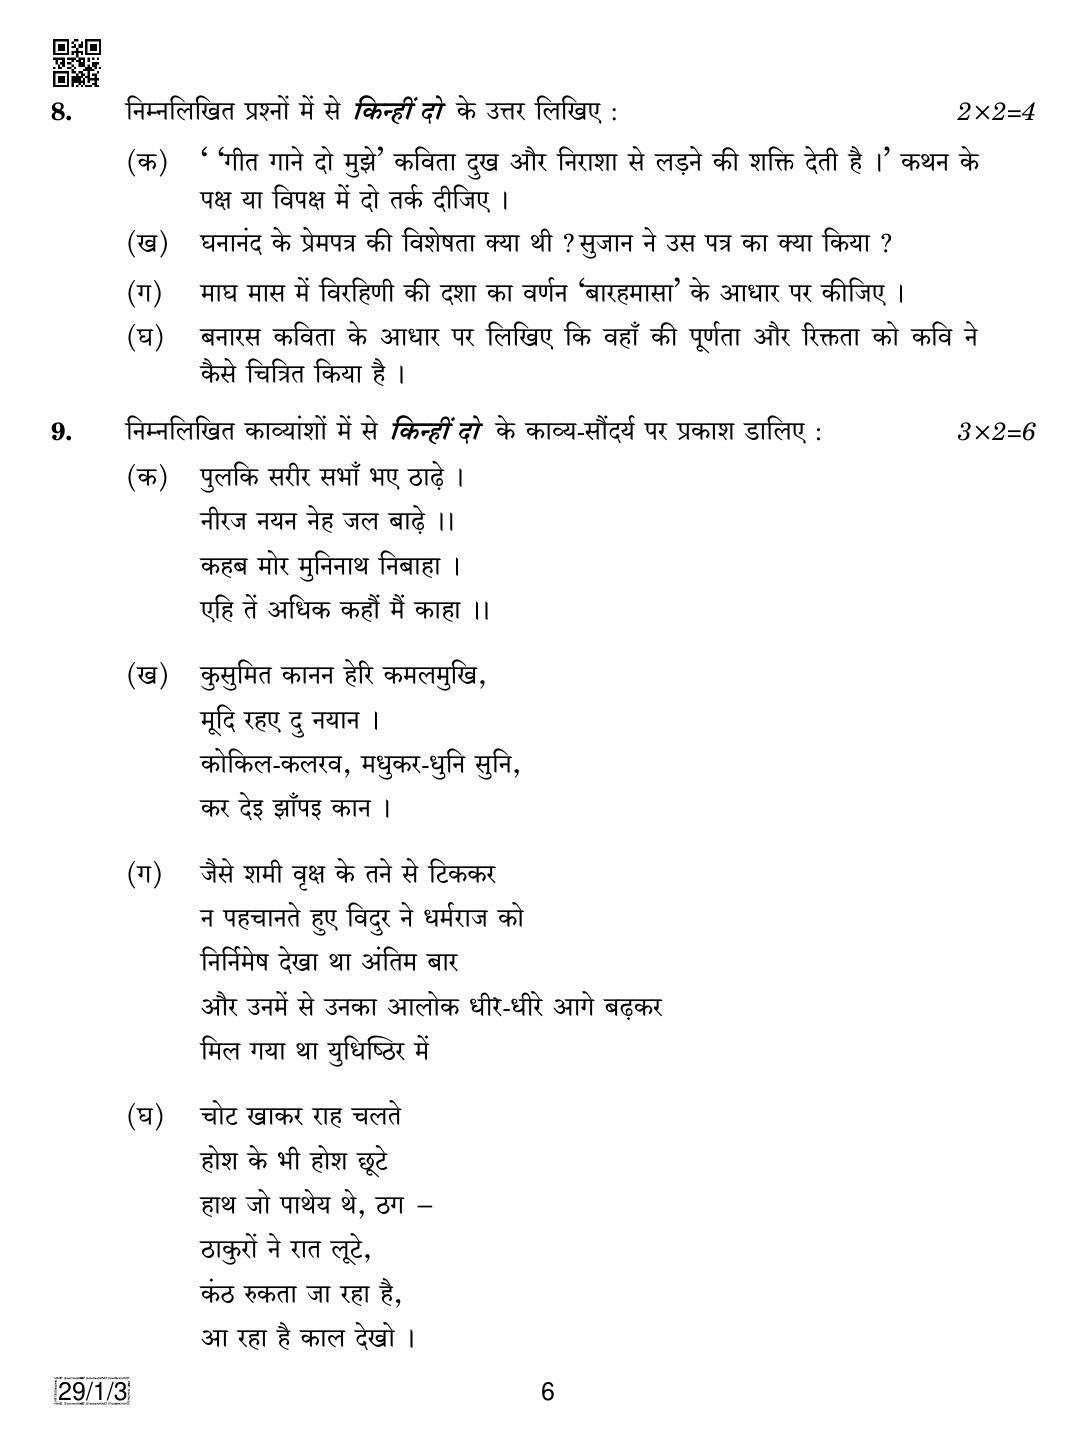 CBSE Class 12 29-1-3 HINDI ELECTIVE 2019 Compartment Question Paper - Page 6